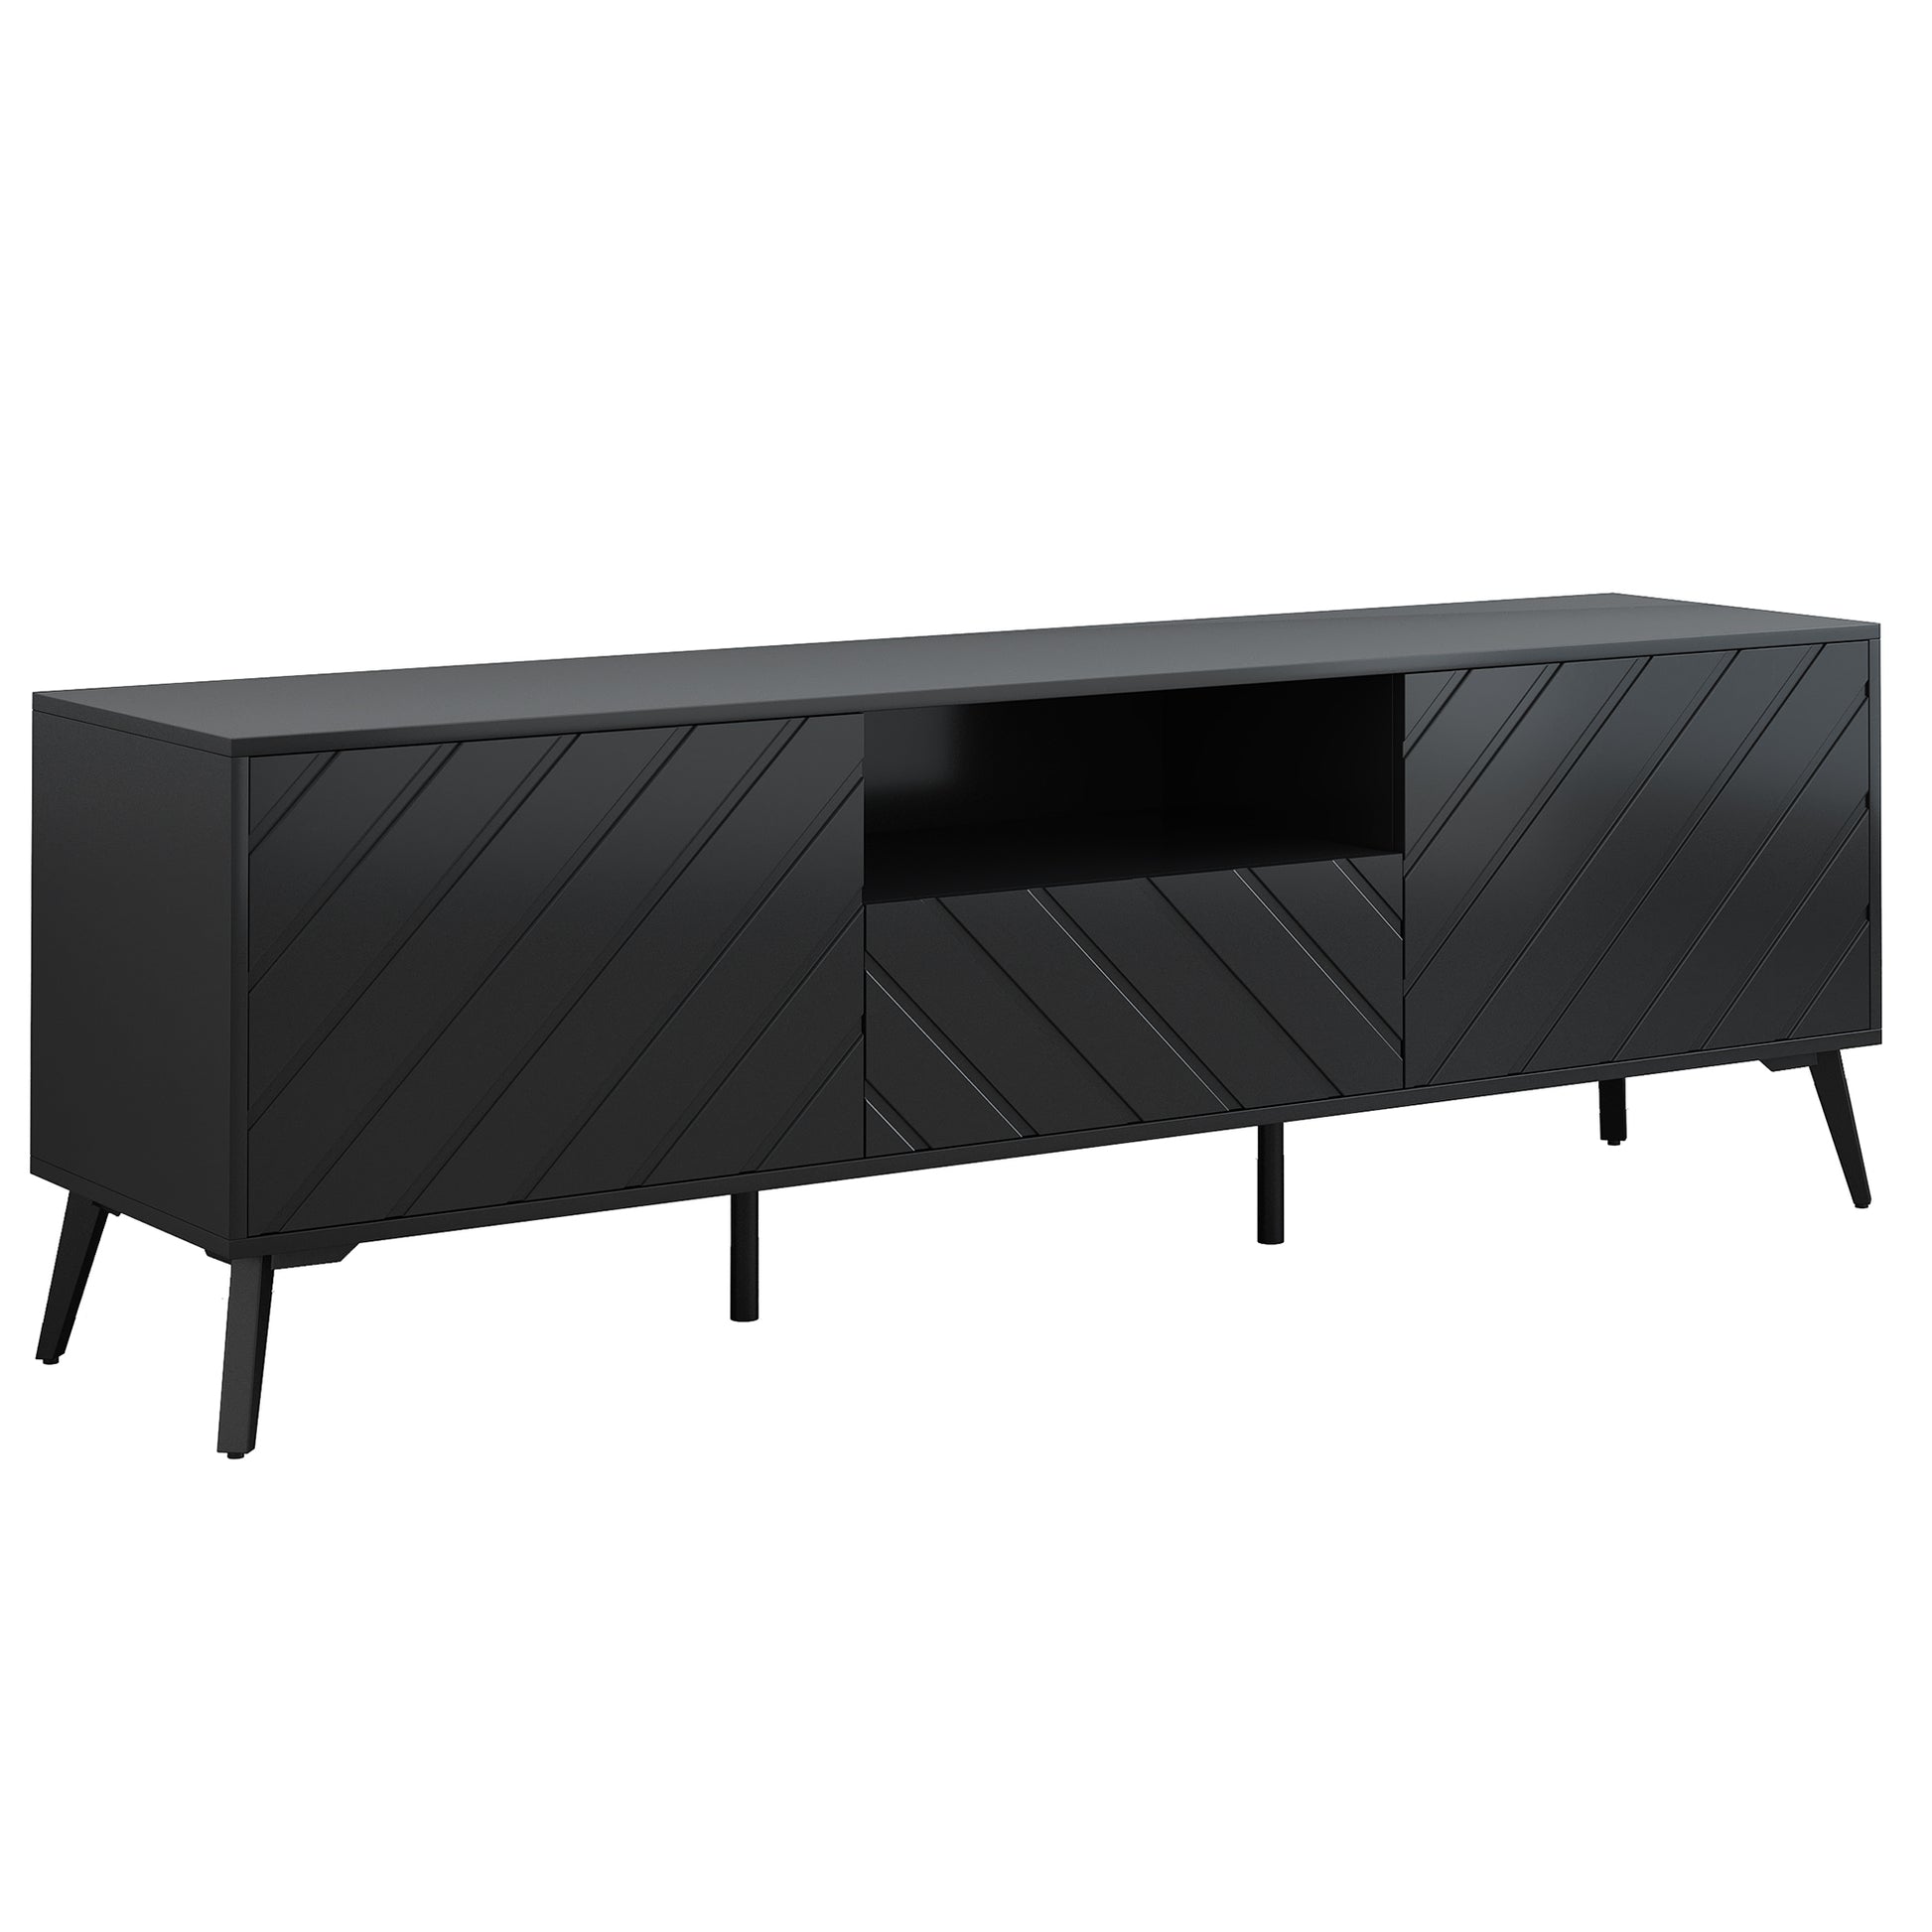 U Can Modern TV Stand for 70 inch TV, Entertainment black-mdf